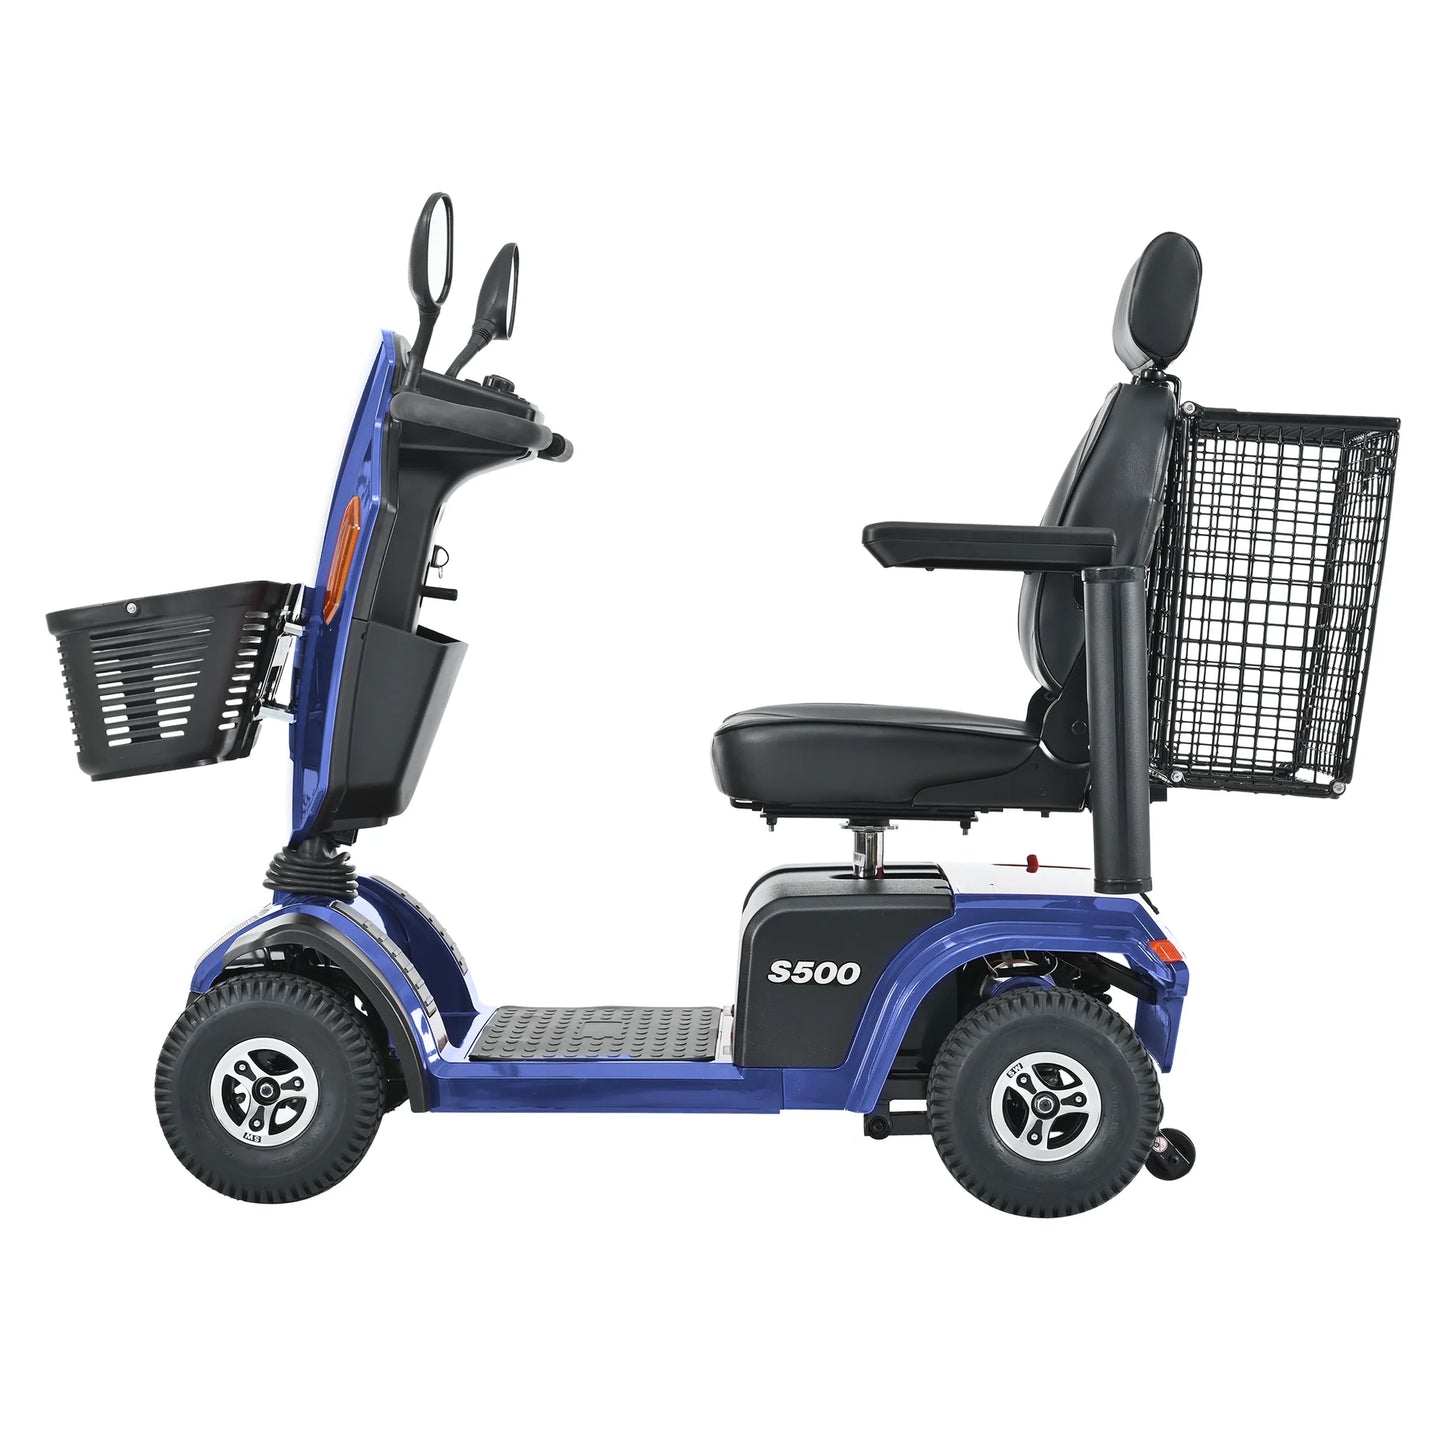 Metro S500 Mobility Scooter - Blue | Bike Lover USA | Metro Mobility